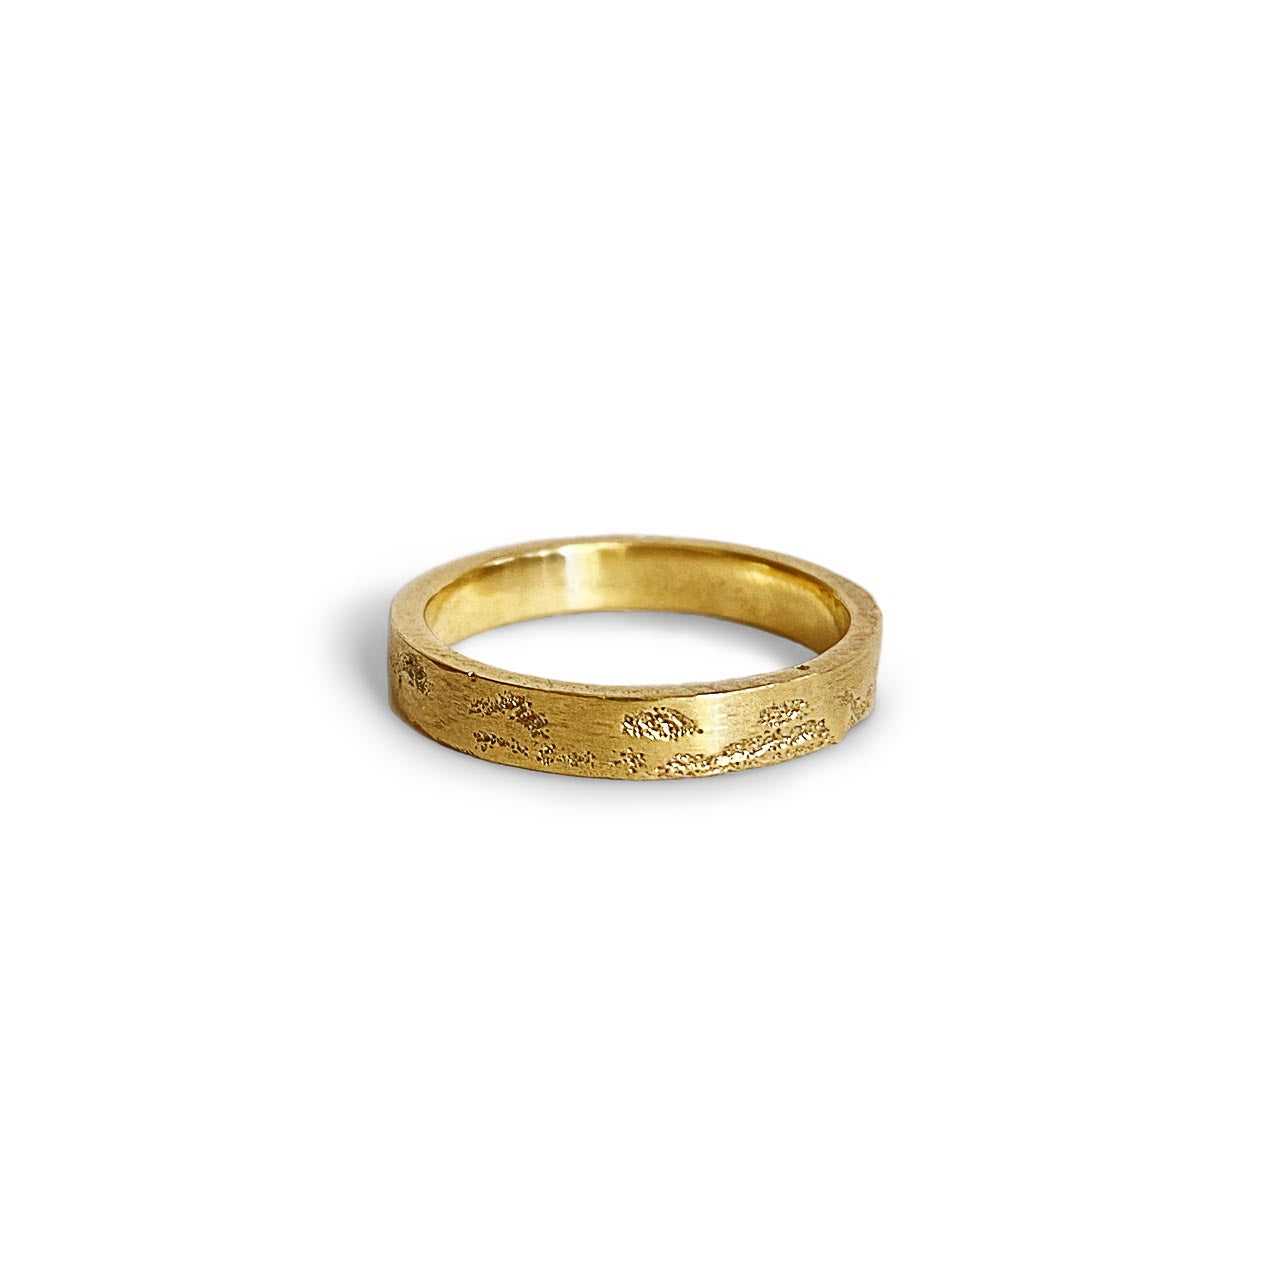 divorce ring in yellow gold on a white background